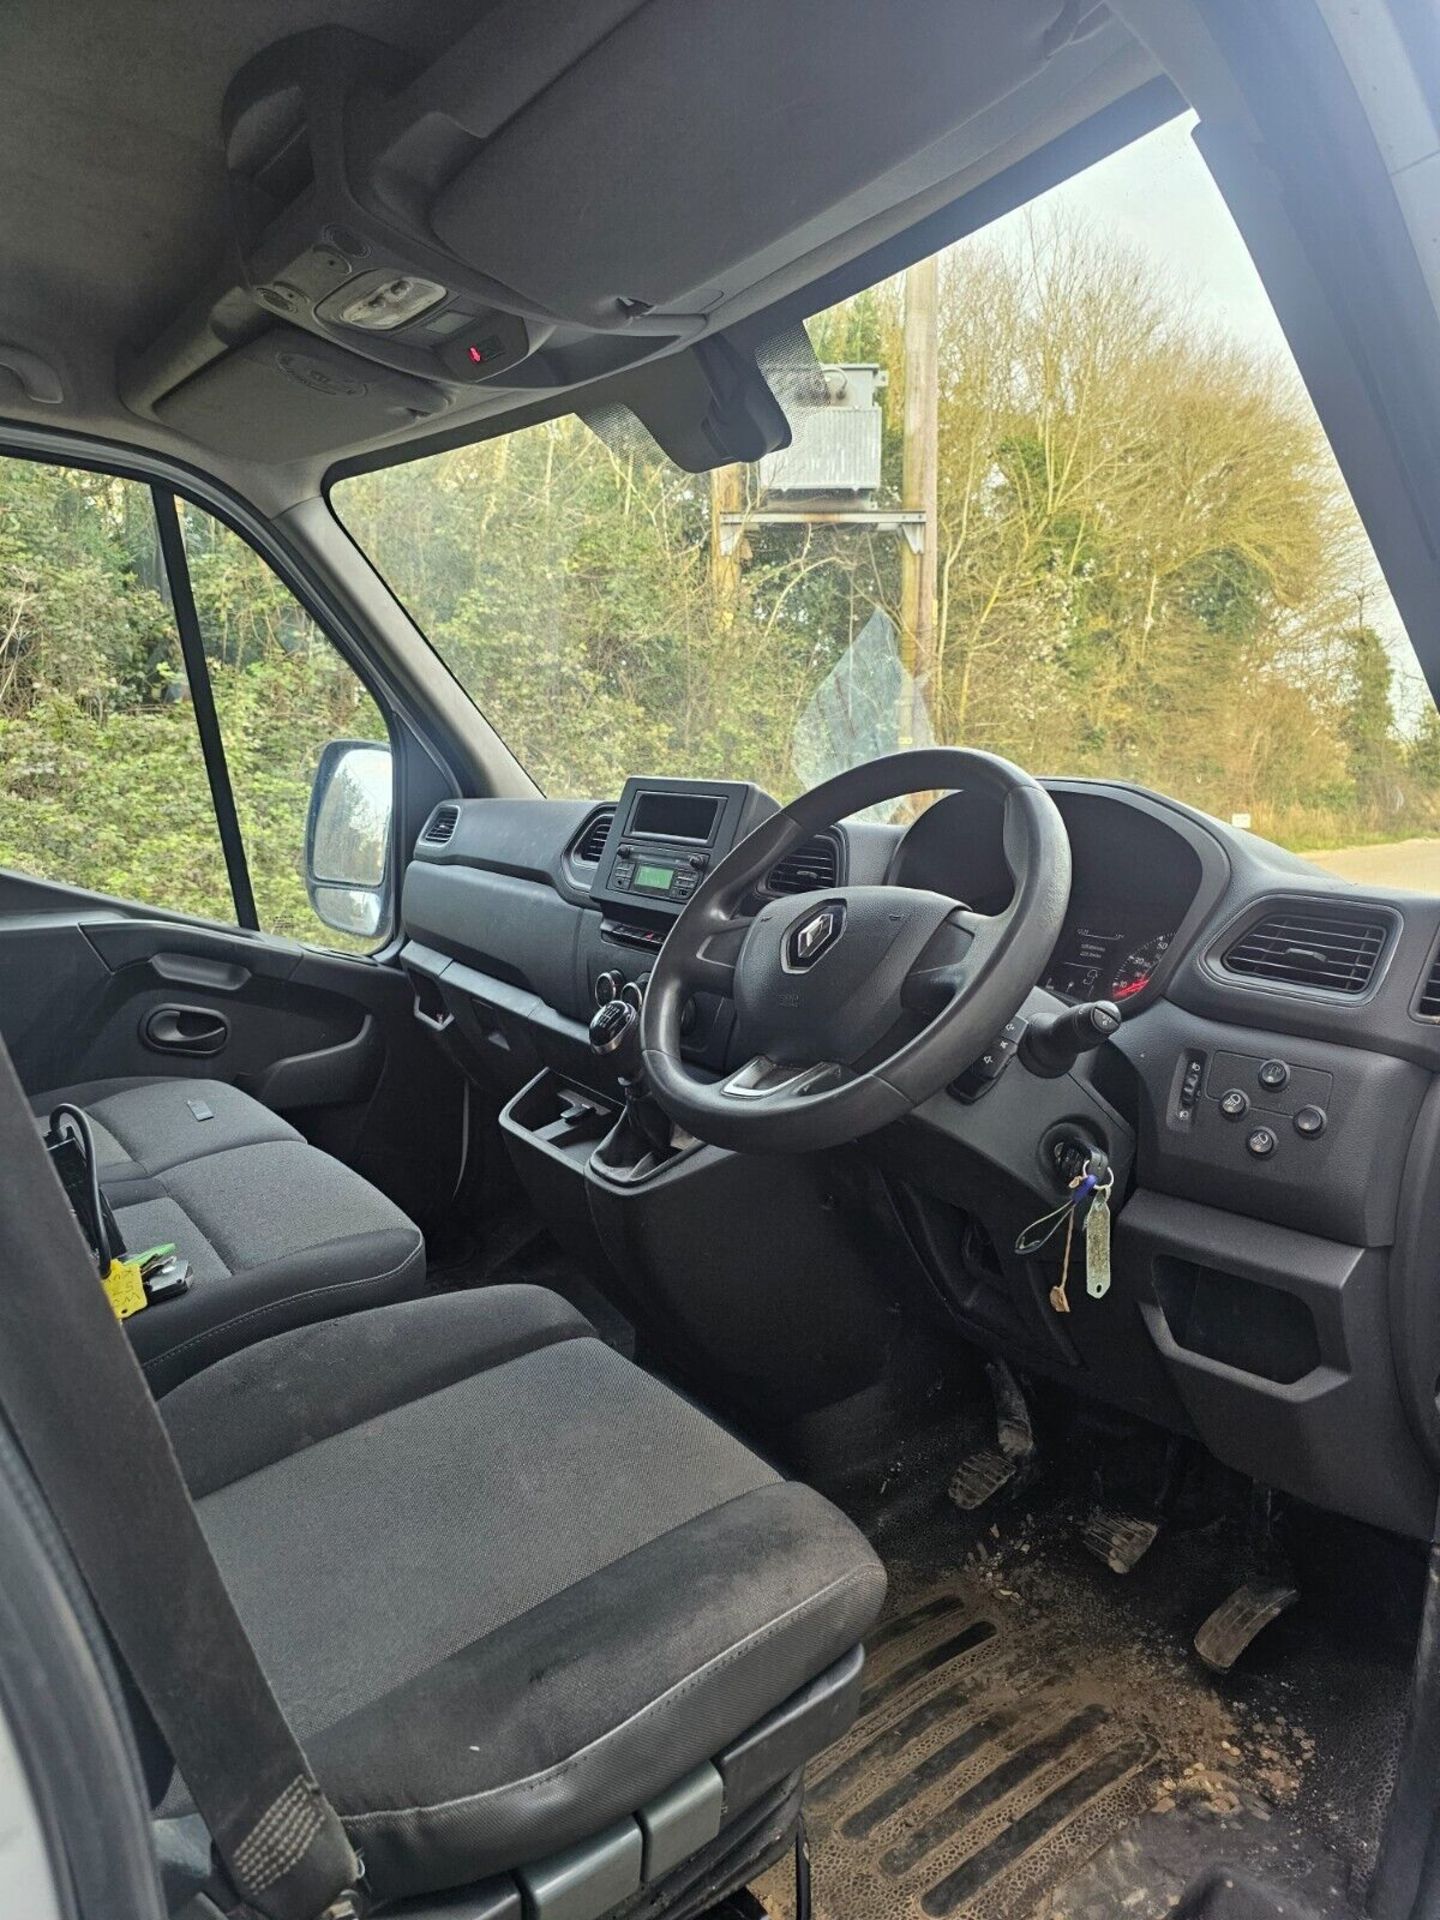 2020 RENAULT MASTER BUSINESS PLUS, FULLY LOADED - Image 5 of 5